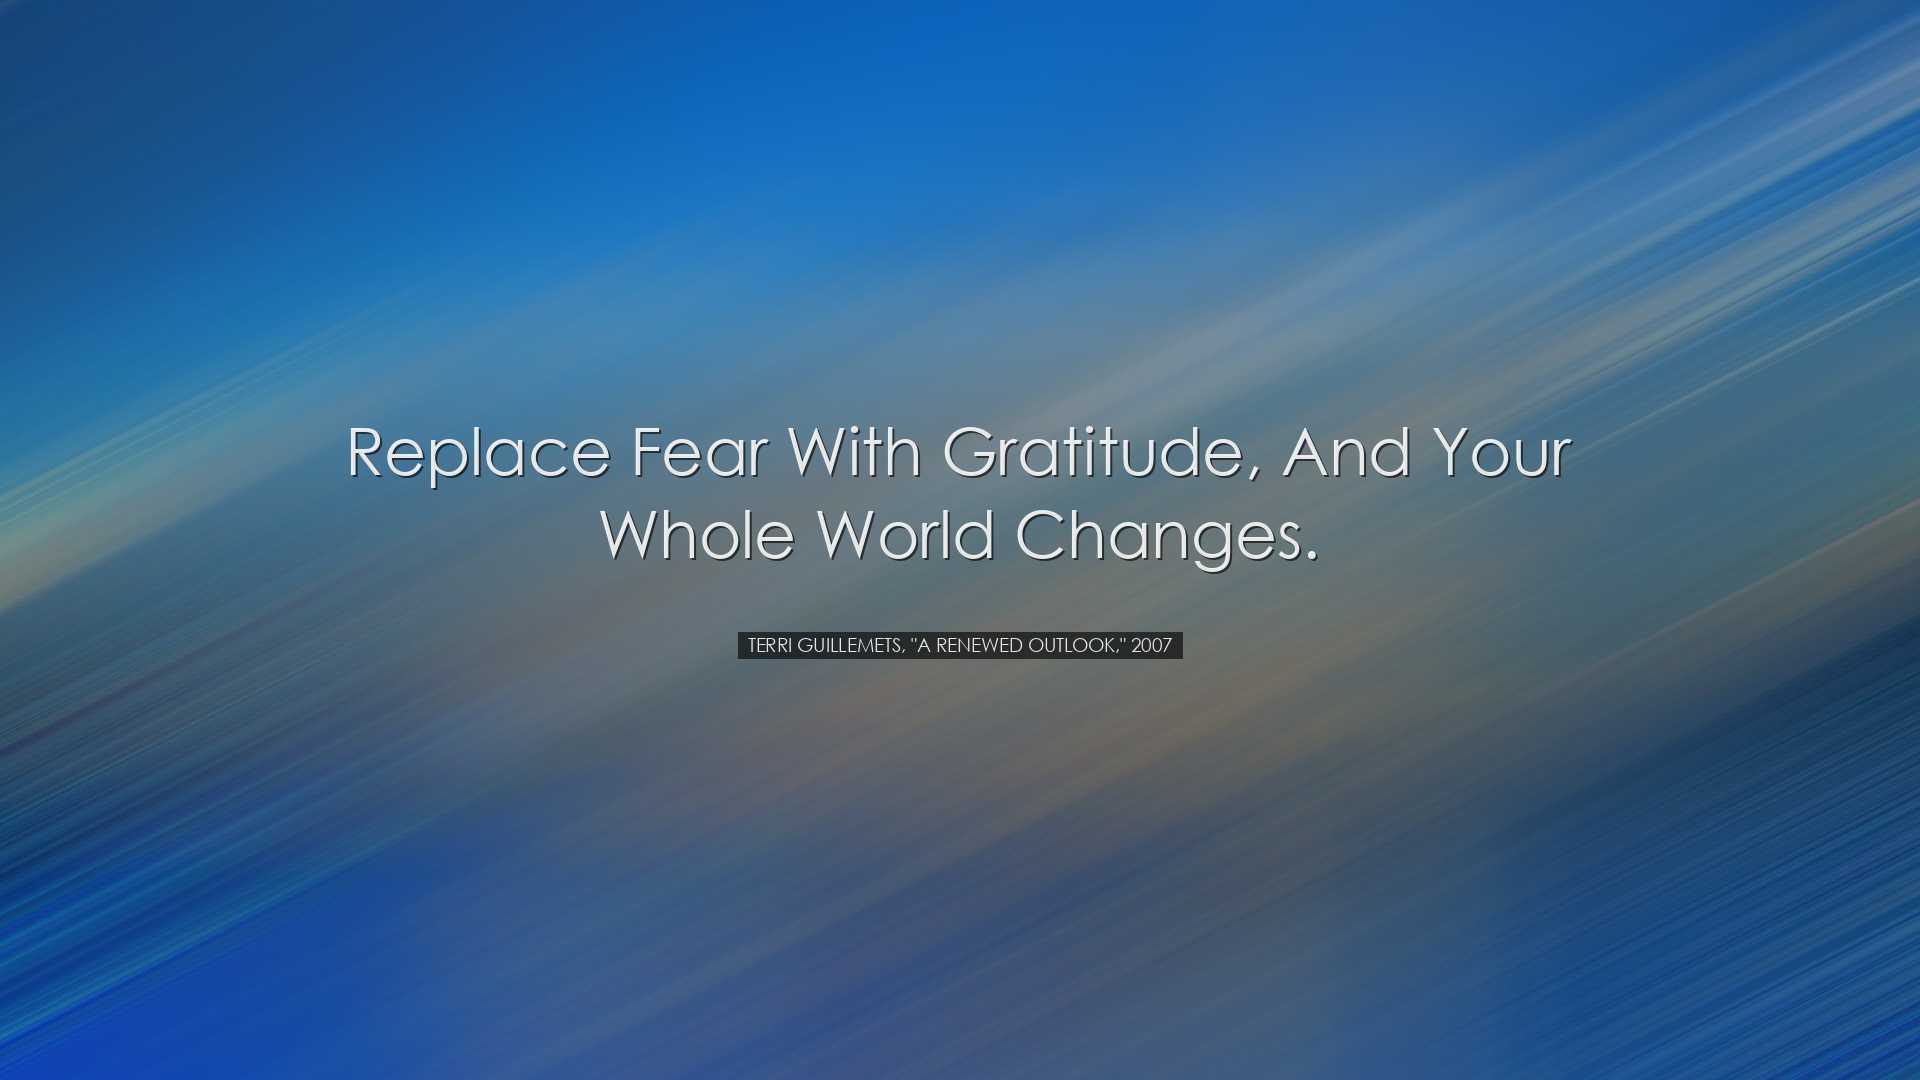 Replace fear with gratitude, and your whole world changes. - Terri